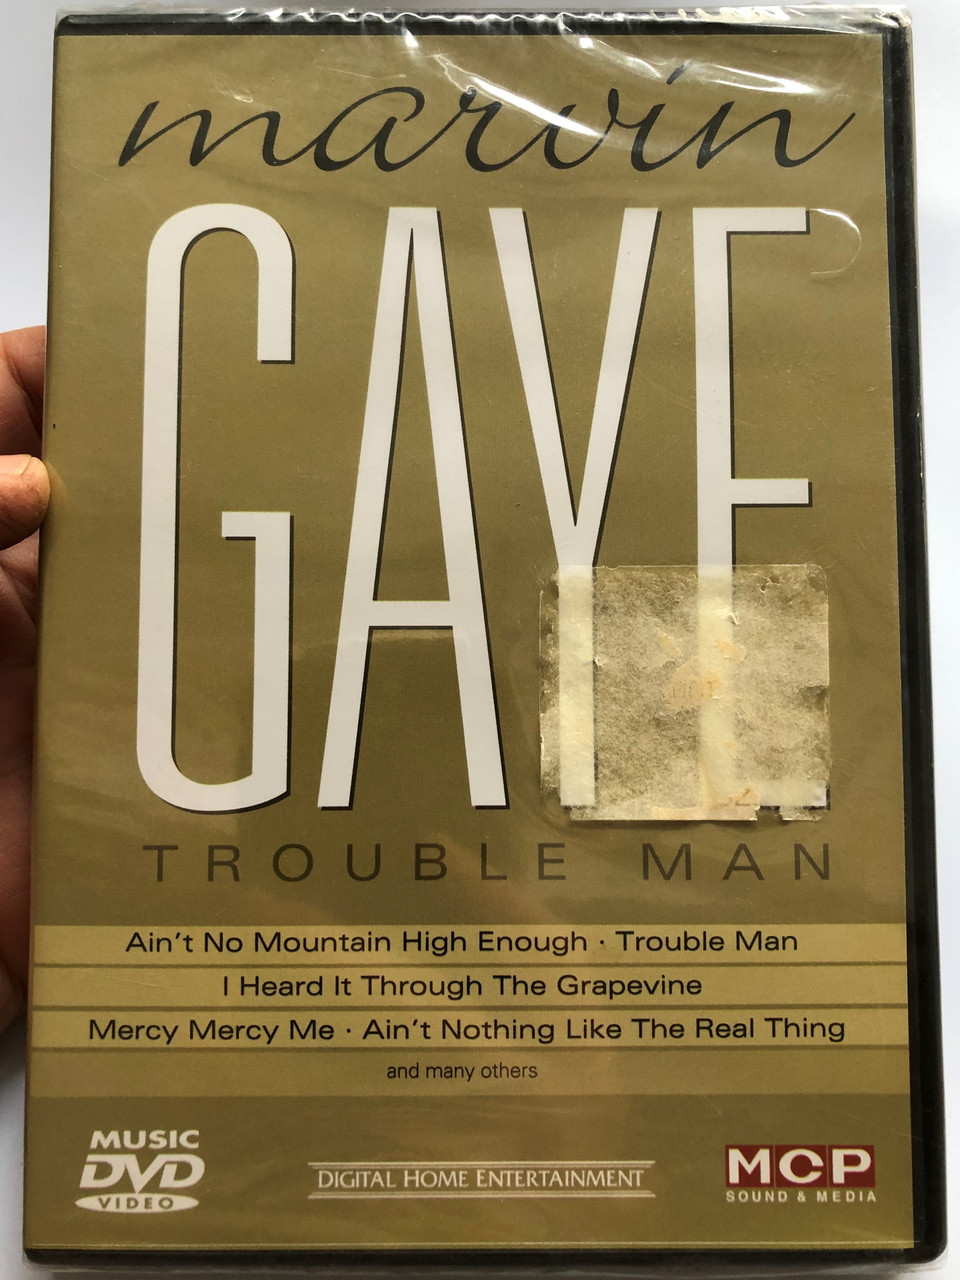 Marvin Gaye - Trouble Man DVD Ain't no Mountain High Enough, I heard it  through the Grapevine, Ain't nothing like the real thing / MCP Sound &  Media 161.221 - bibleinmylanguage